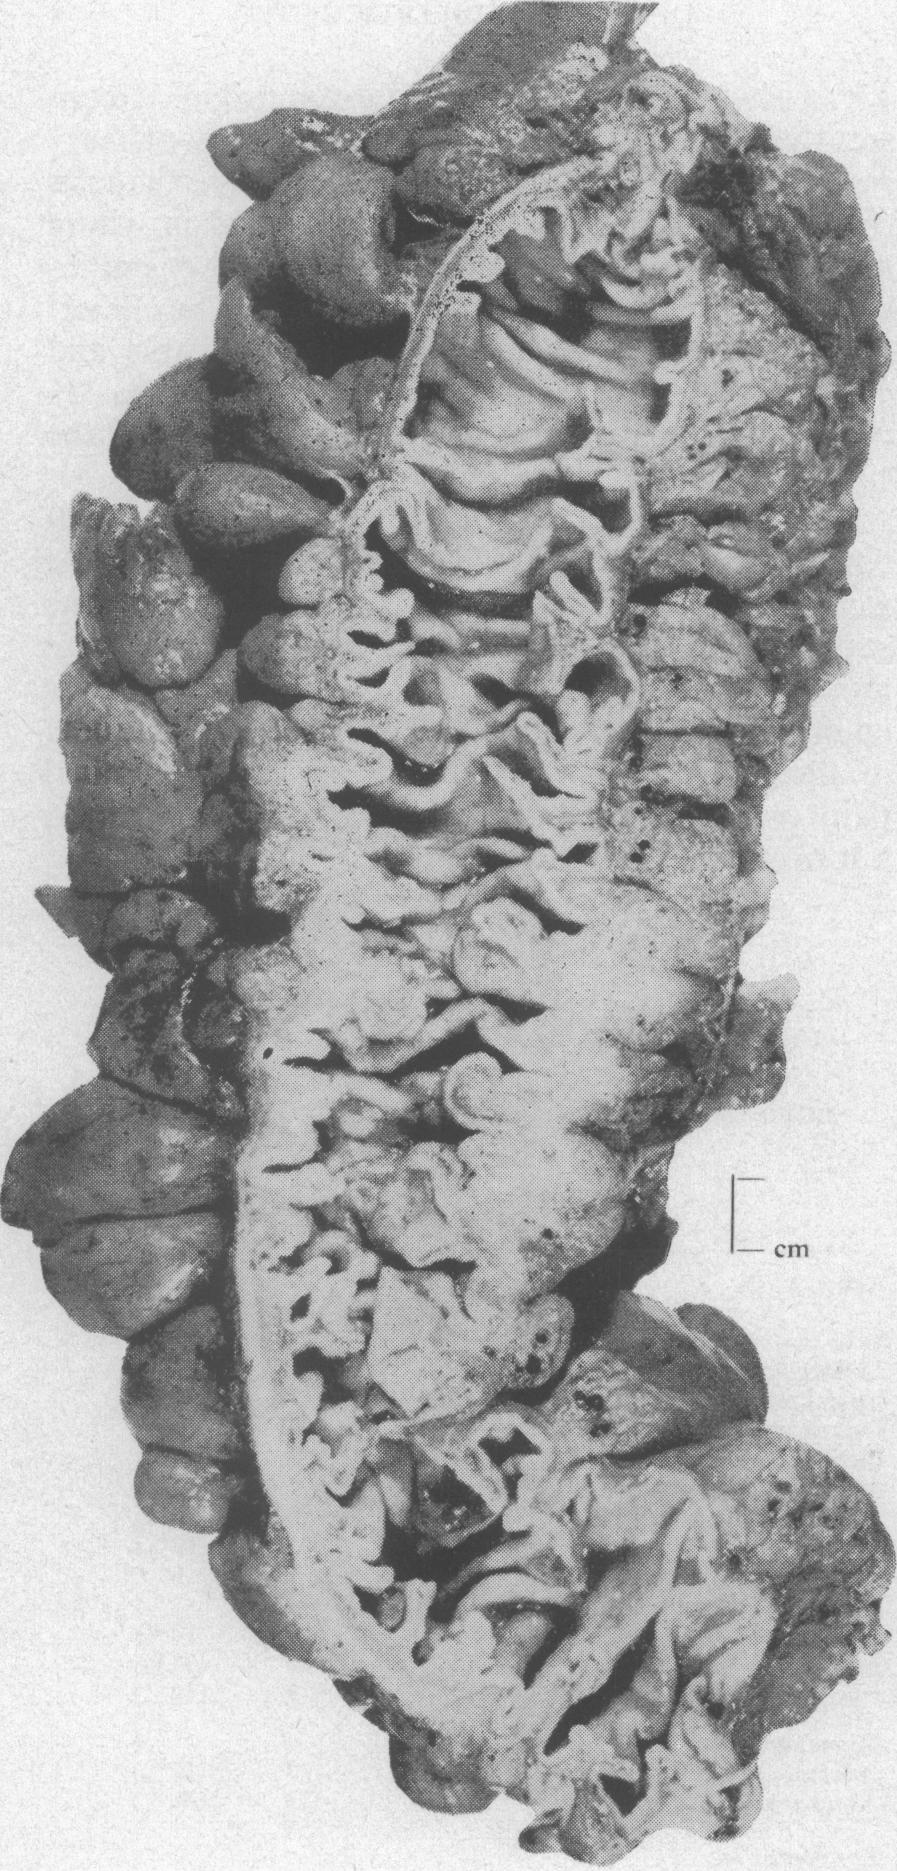 Crohn's disease of the colon and its distinction from diverticulitis FIG. 8.